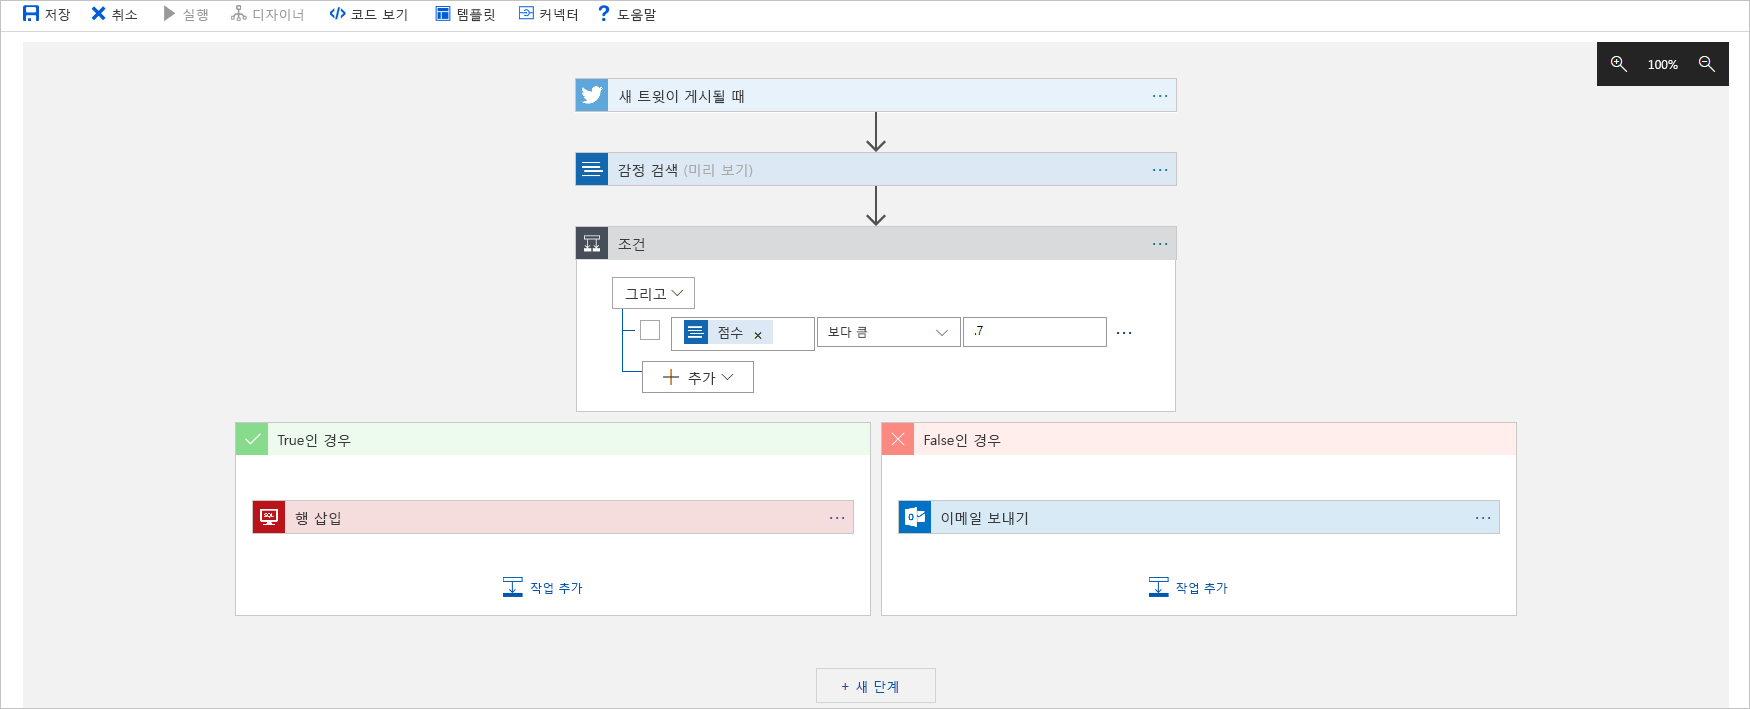 Screenshot shows example logic app workflow in the designer. A box for each step represents the trigger and each action. Arrows connect the boxes to show execution through the workflow.